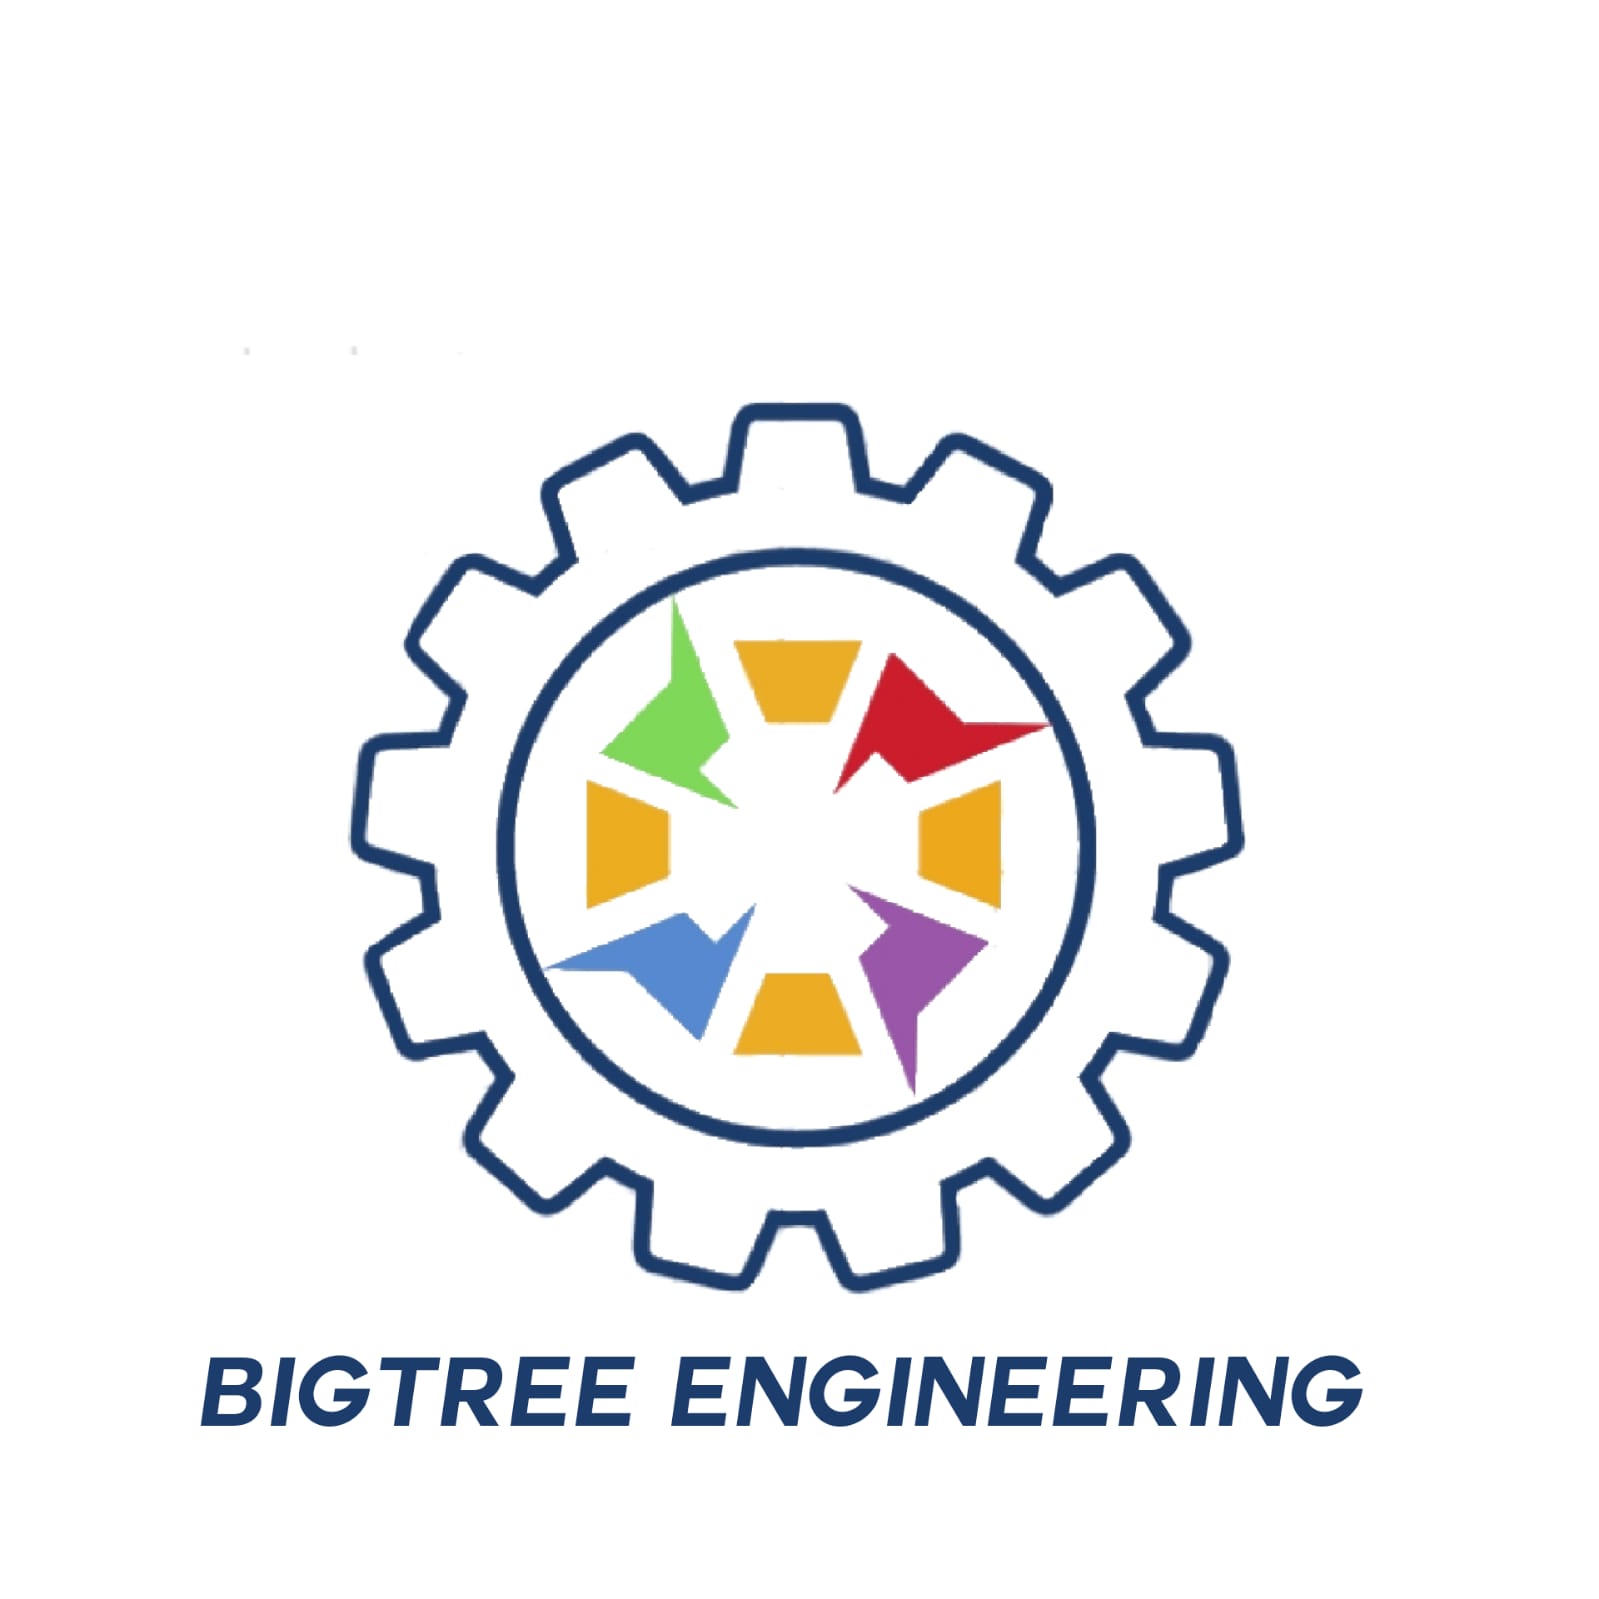 Company logo for Bigtree Engineering Services Pte. Ltd.